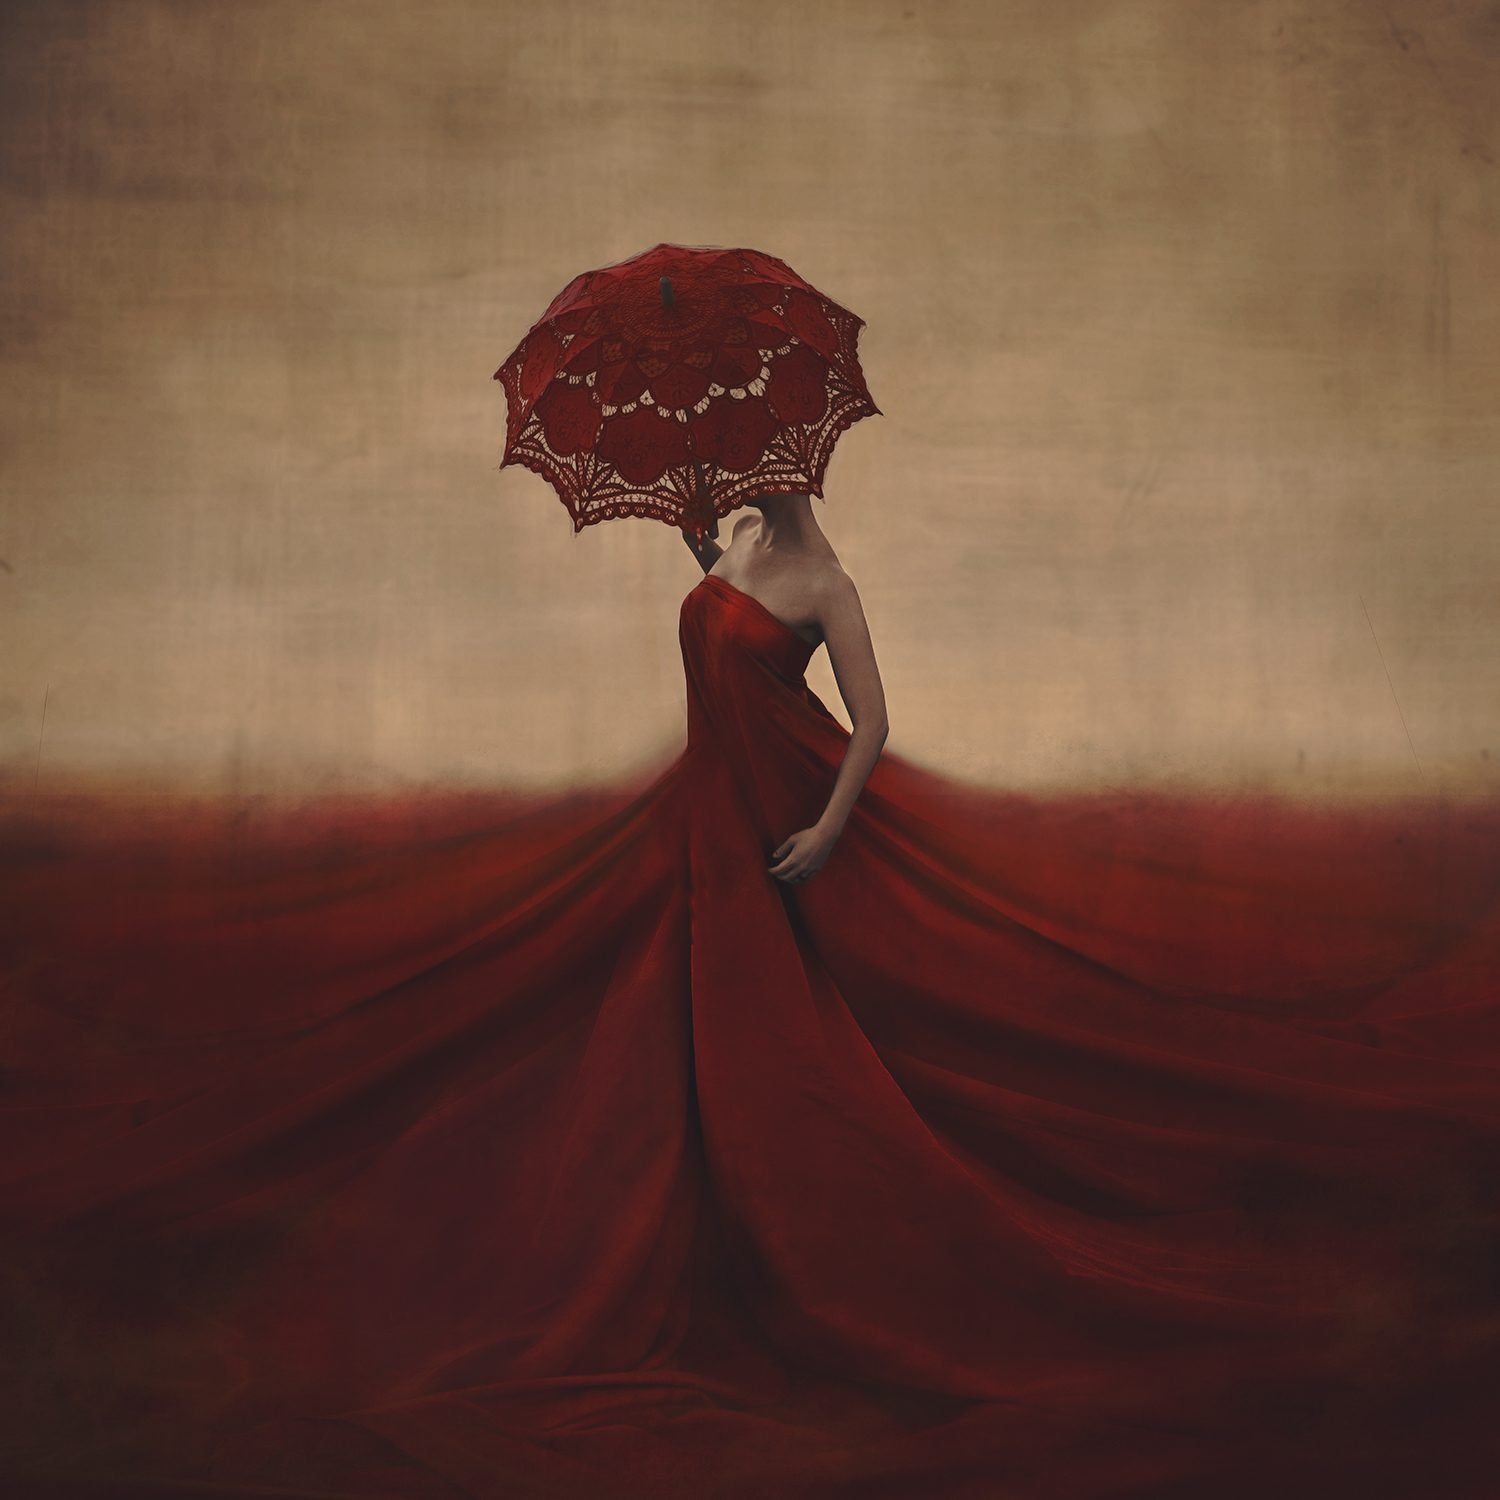 The Creation Of Blood And Bones by Brooke Shaden